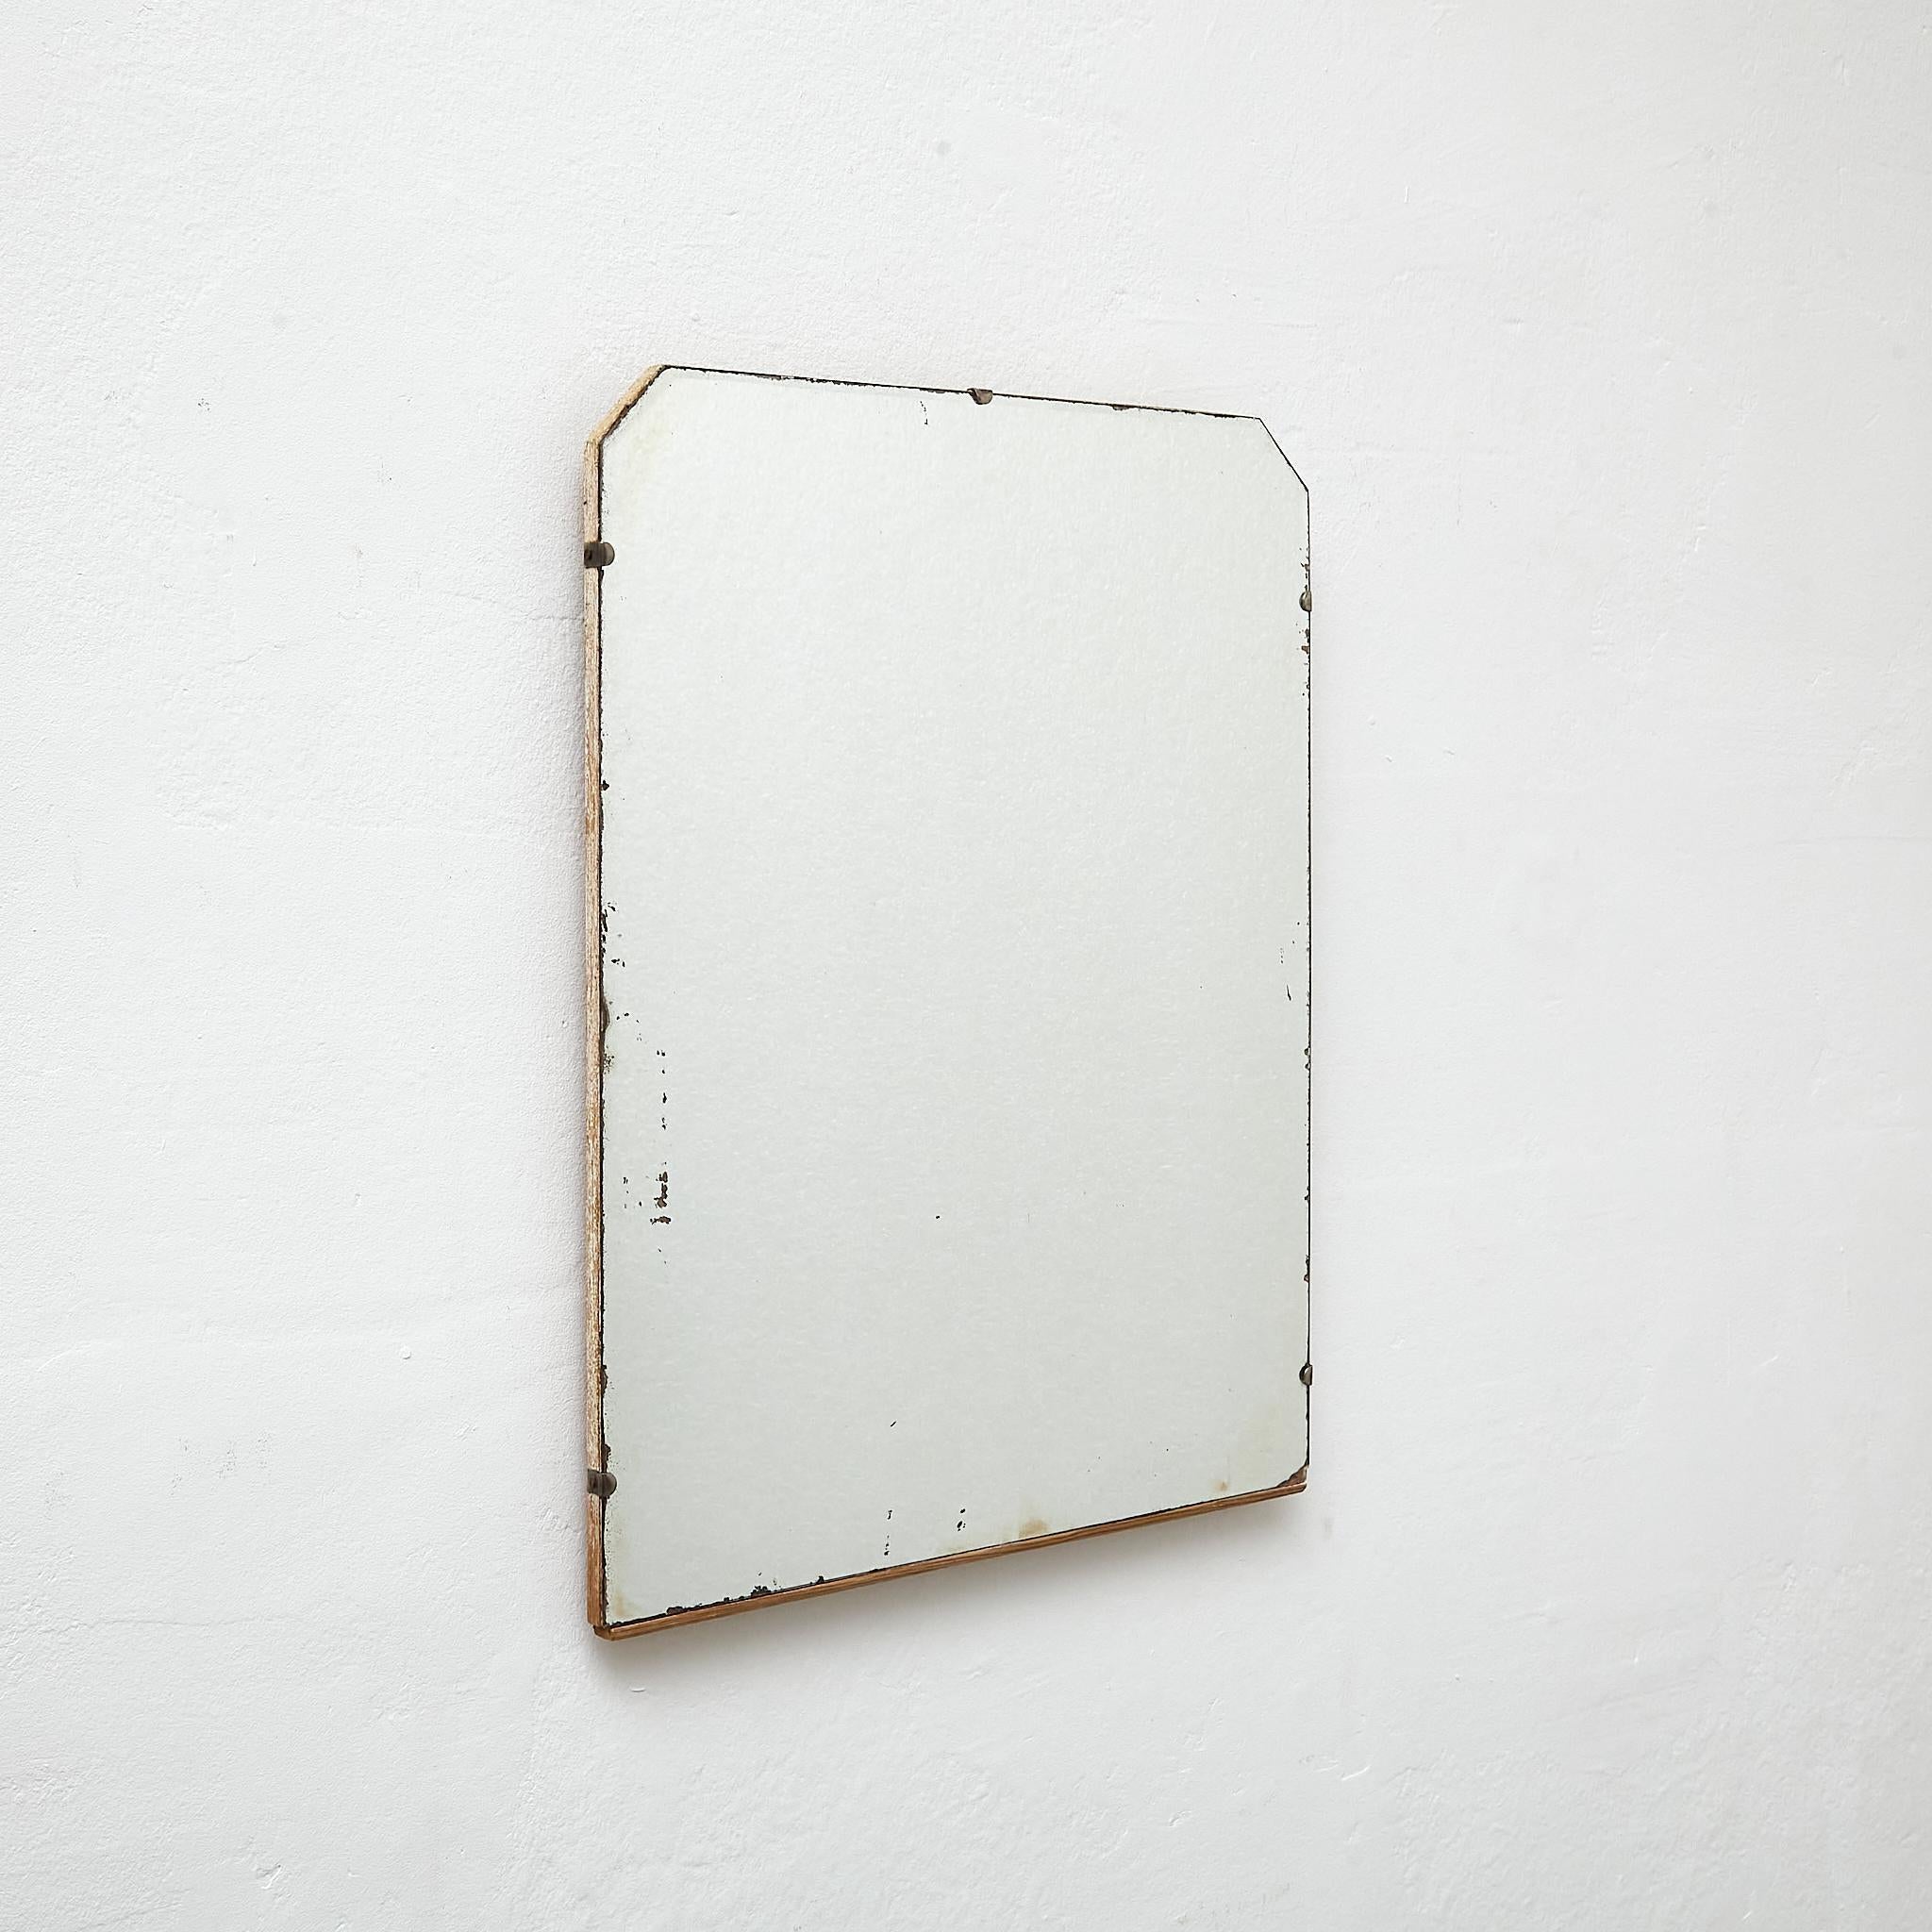 Antique Early 20th Century French Wall Mirror.

Manufactured France, circa 1940.

Materials:
Wood, mirror

Dimensions: 
D 1,3 x W 42.5 cm x H 55 cm

In original condition, with minor wear consistent with age and use, preserving a beautiful